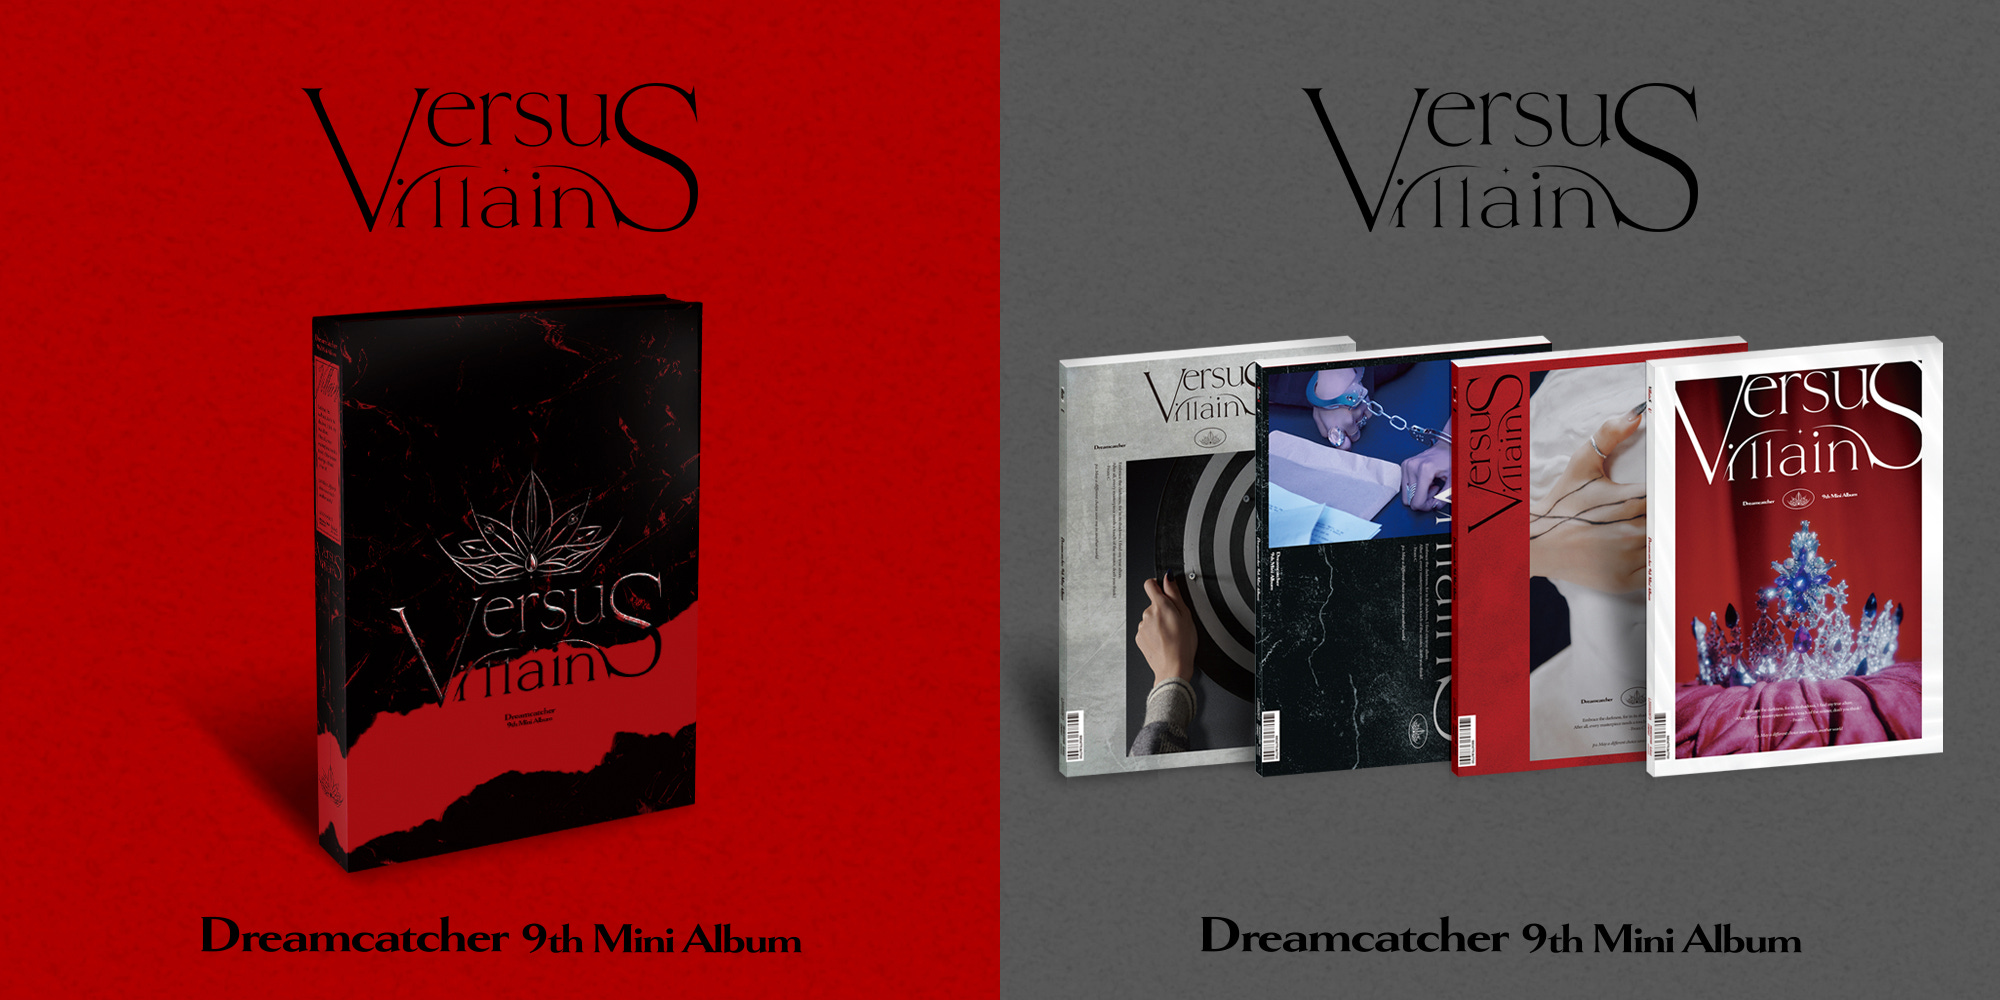 Dreamcatcher 9th mini album designs, C version black and red and U,R,S, and E versions having photographic imagery.